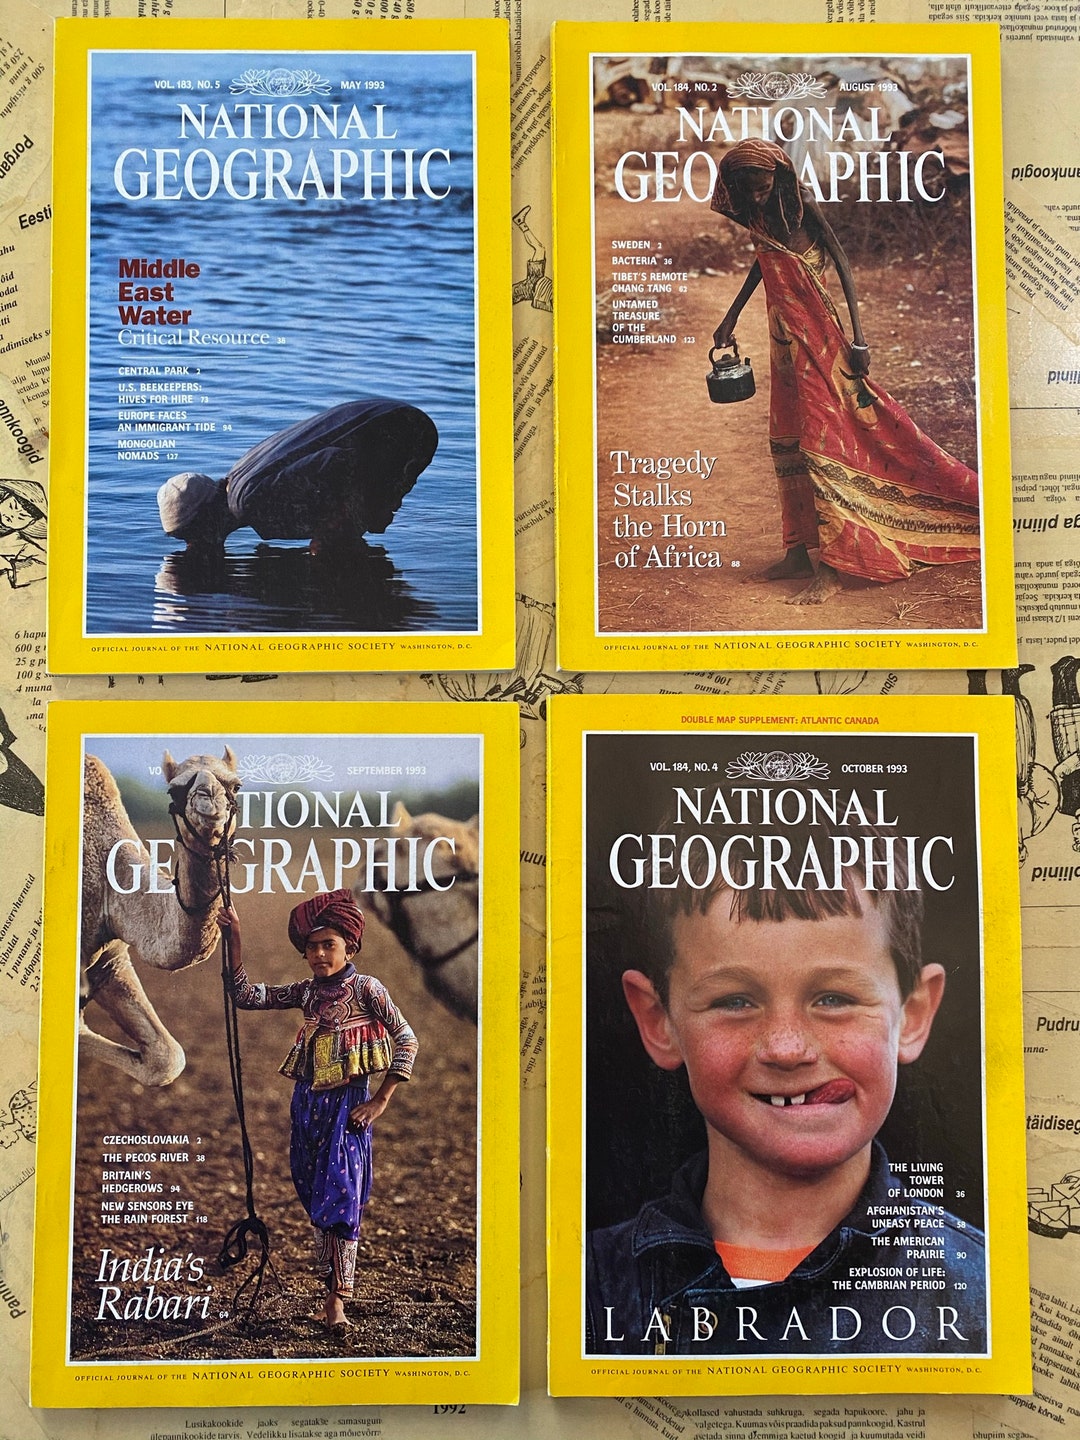 National Geographic 1993 - Etsy